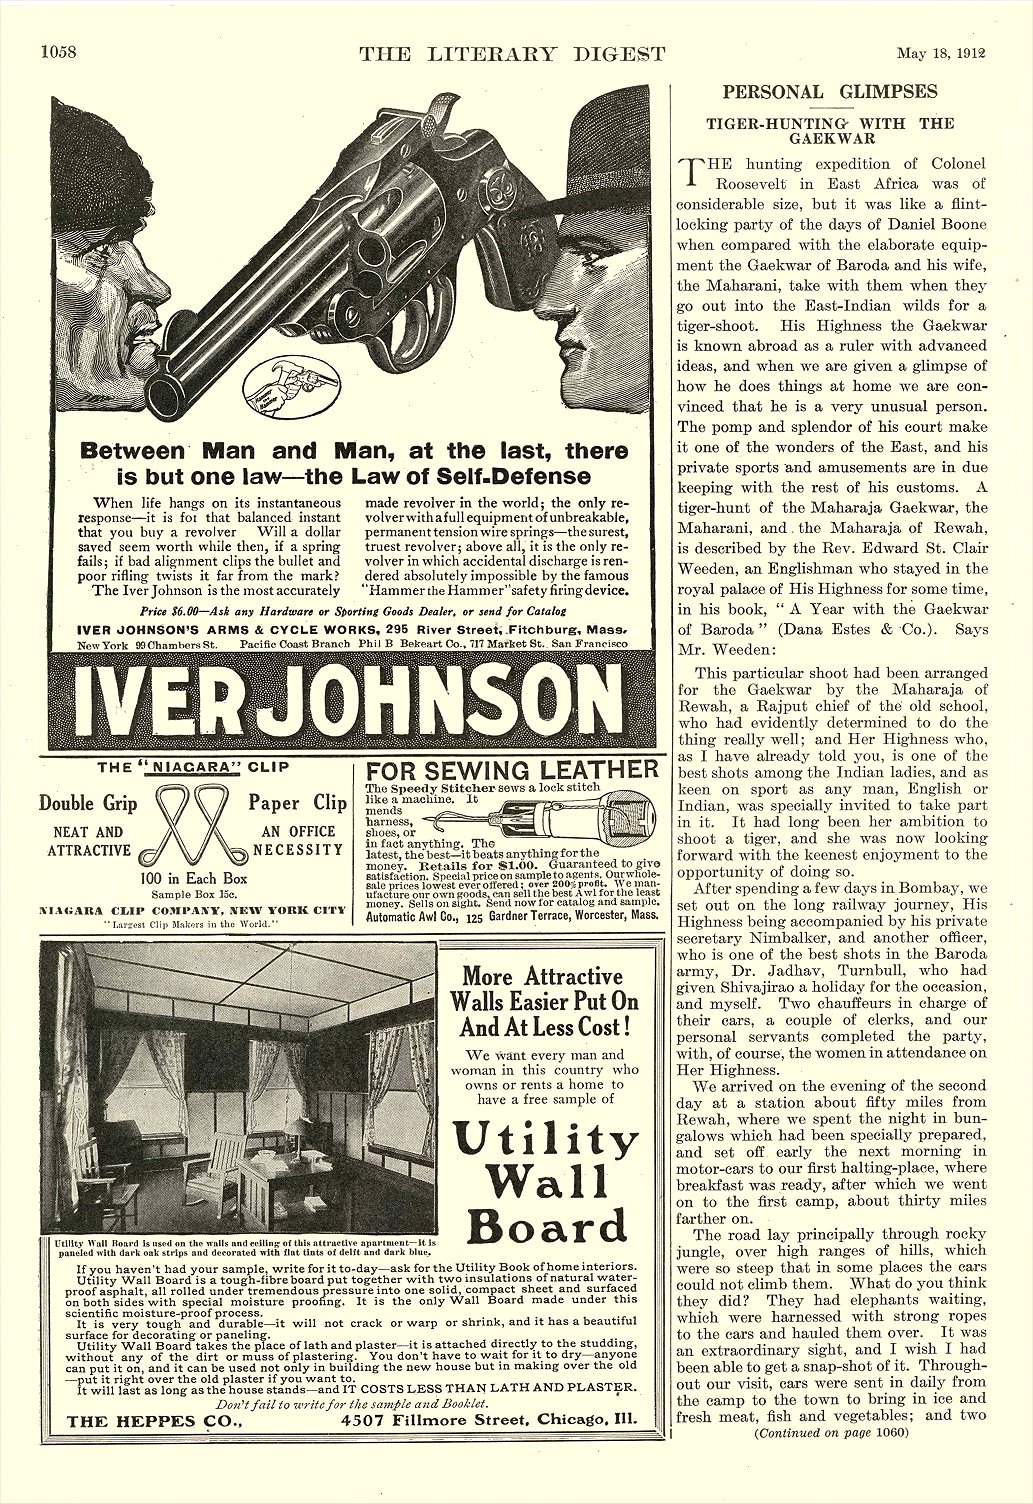 1912 5 18 IVER JOHNSON – the Law of Self-Defense Iver Johnson Arms & Cycle Works Fitchburg, MASS THE LITERARY DIGEST May 18, 1912 8.25″x11.75″ page 1058